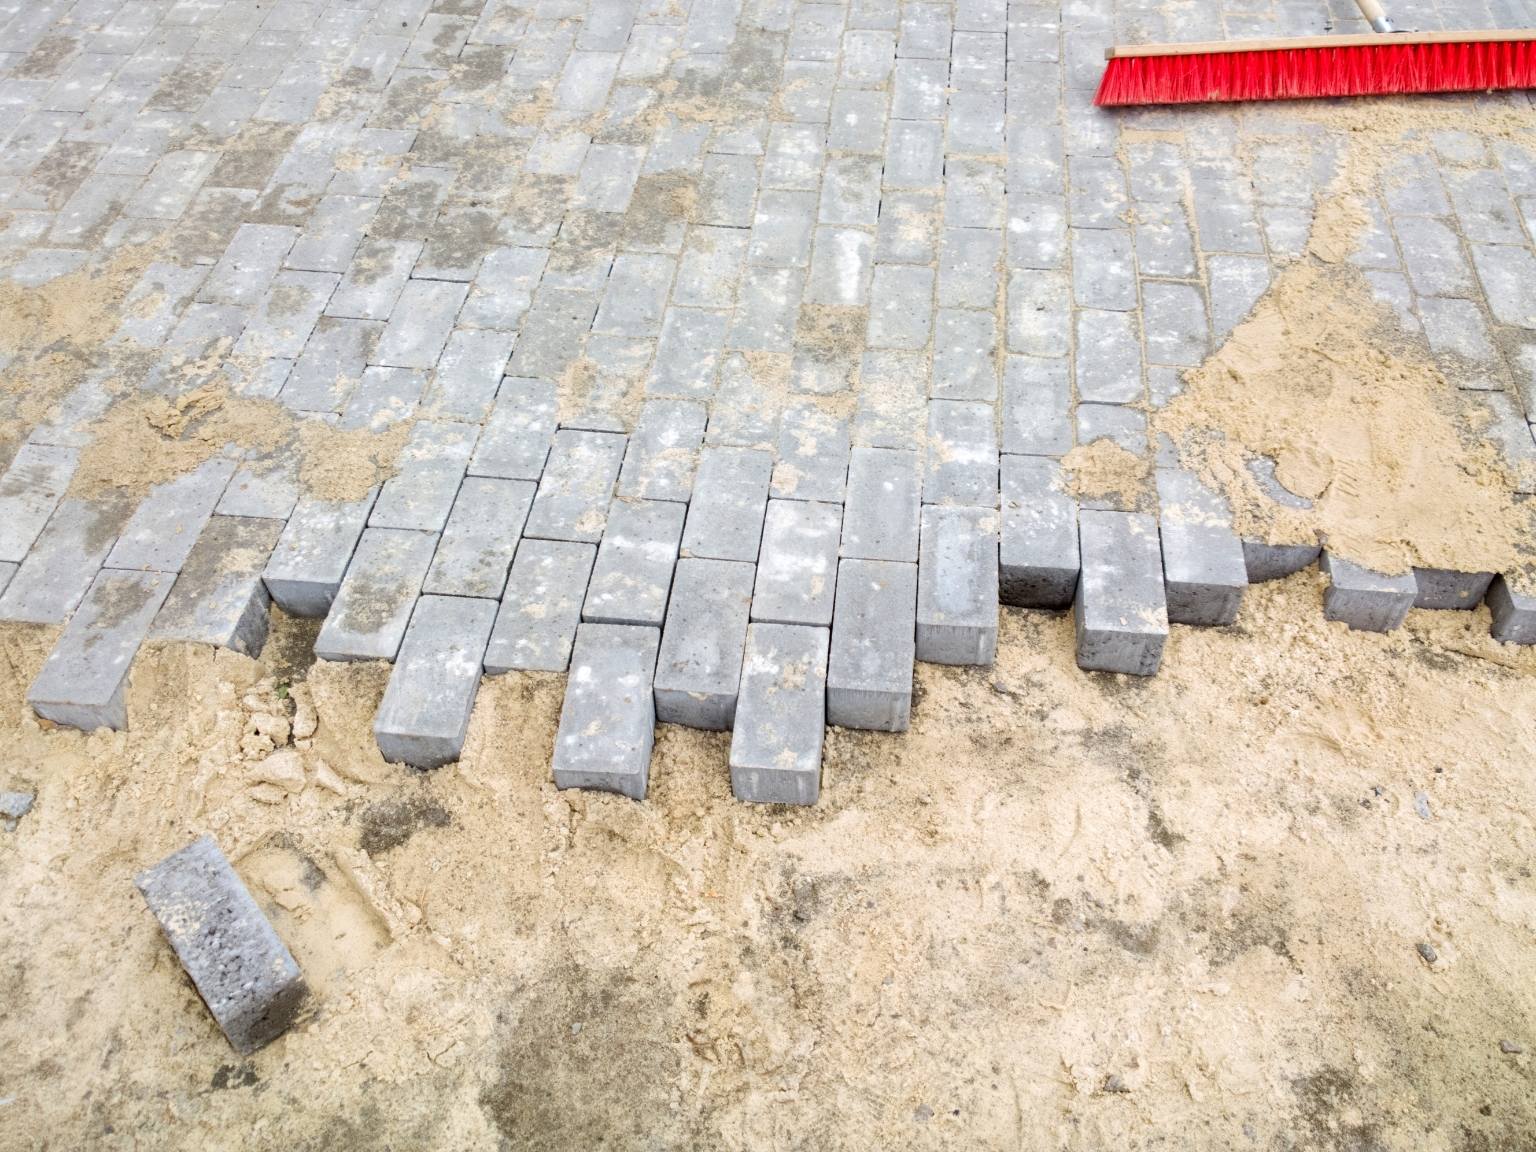 How To Harden Sand Between Pavers And Make Sure It Stays There